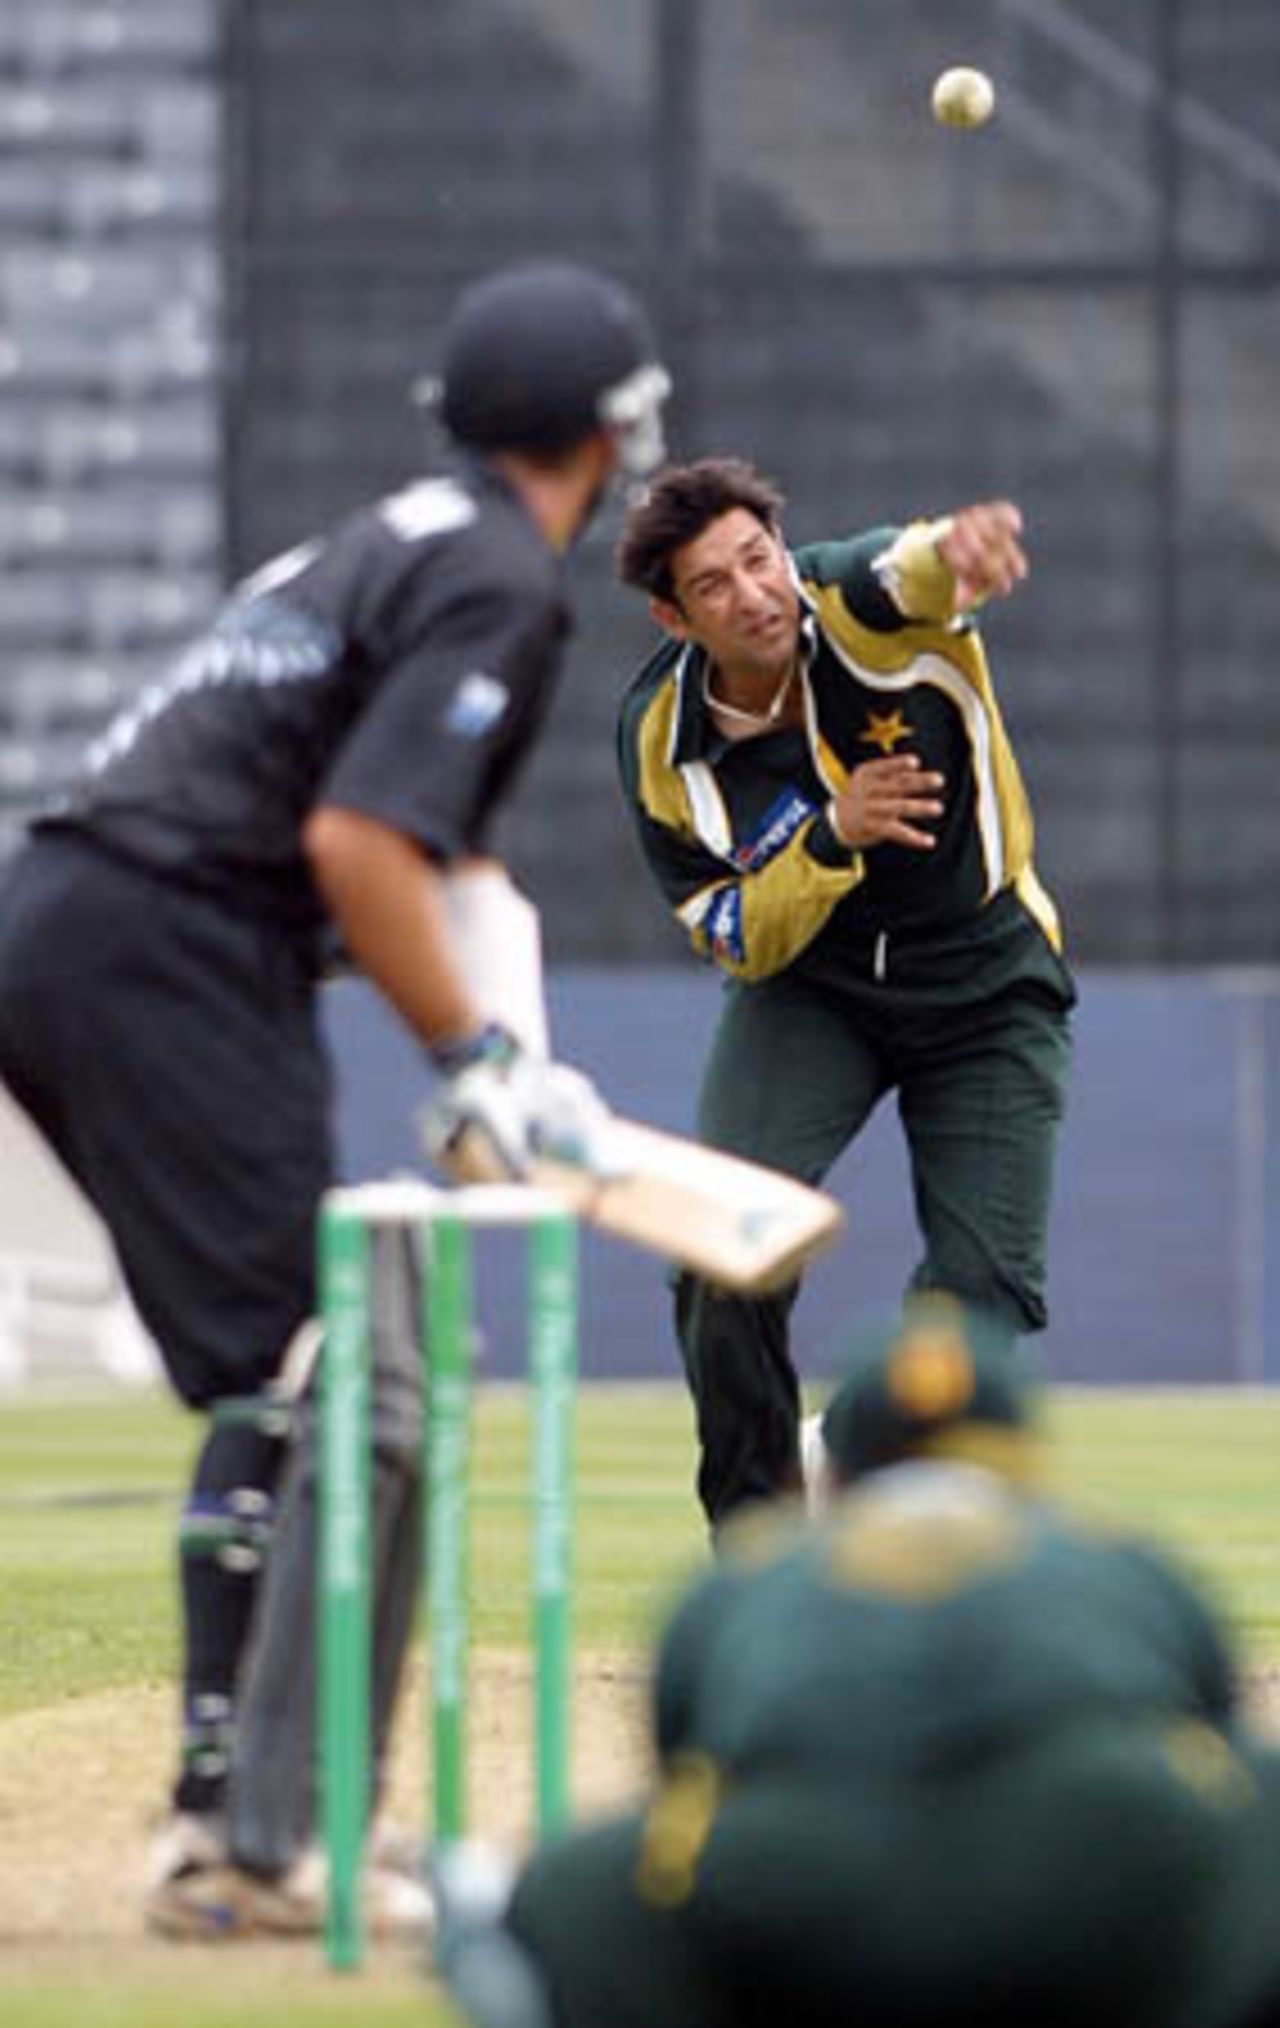 Pakistan fast medium bowler Wasim Akram delivers a ball to New Zealand batsman Craig McMillan during his spell of 0-62 from 10 overs while wicket-keeper Moin Khan looks on in the foreground. 4th One-Day International: New Zealand v Pakistan at Jade Stadium, Christchurch, 25 February 2001.